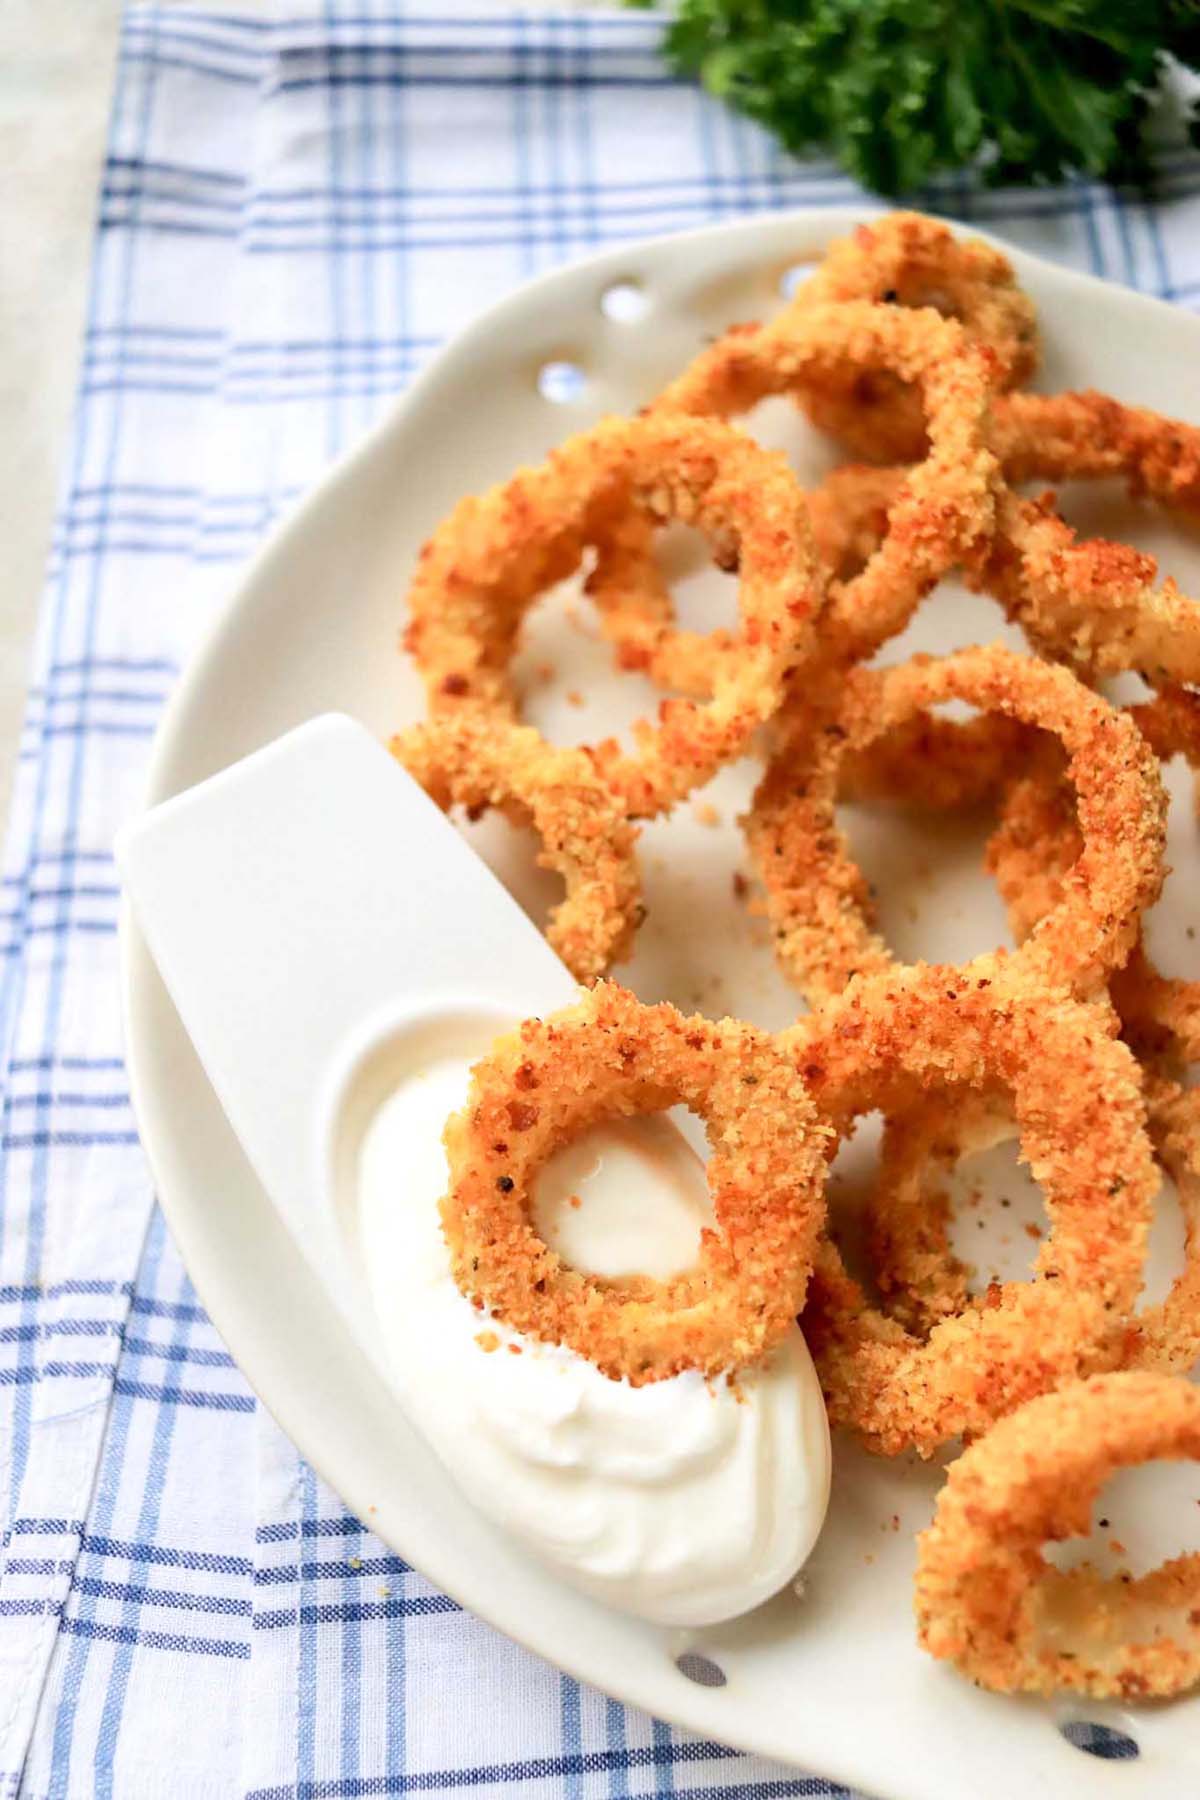 Onion ring dipped in a white sauce.